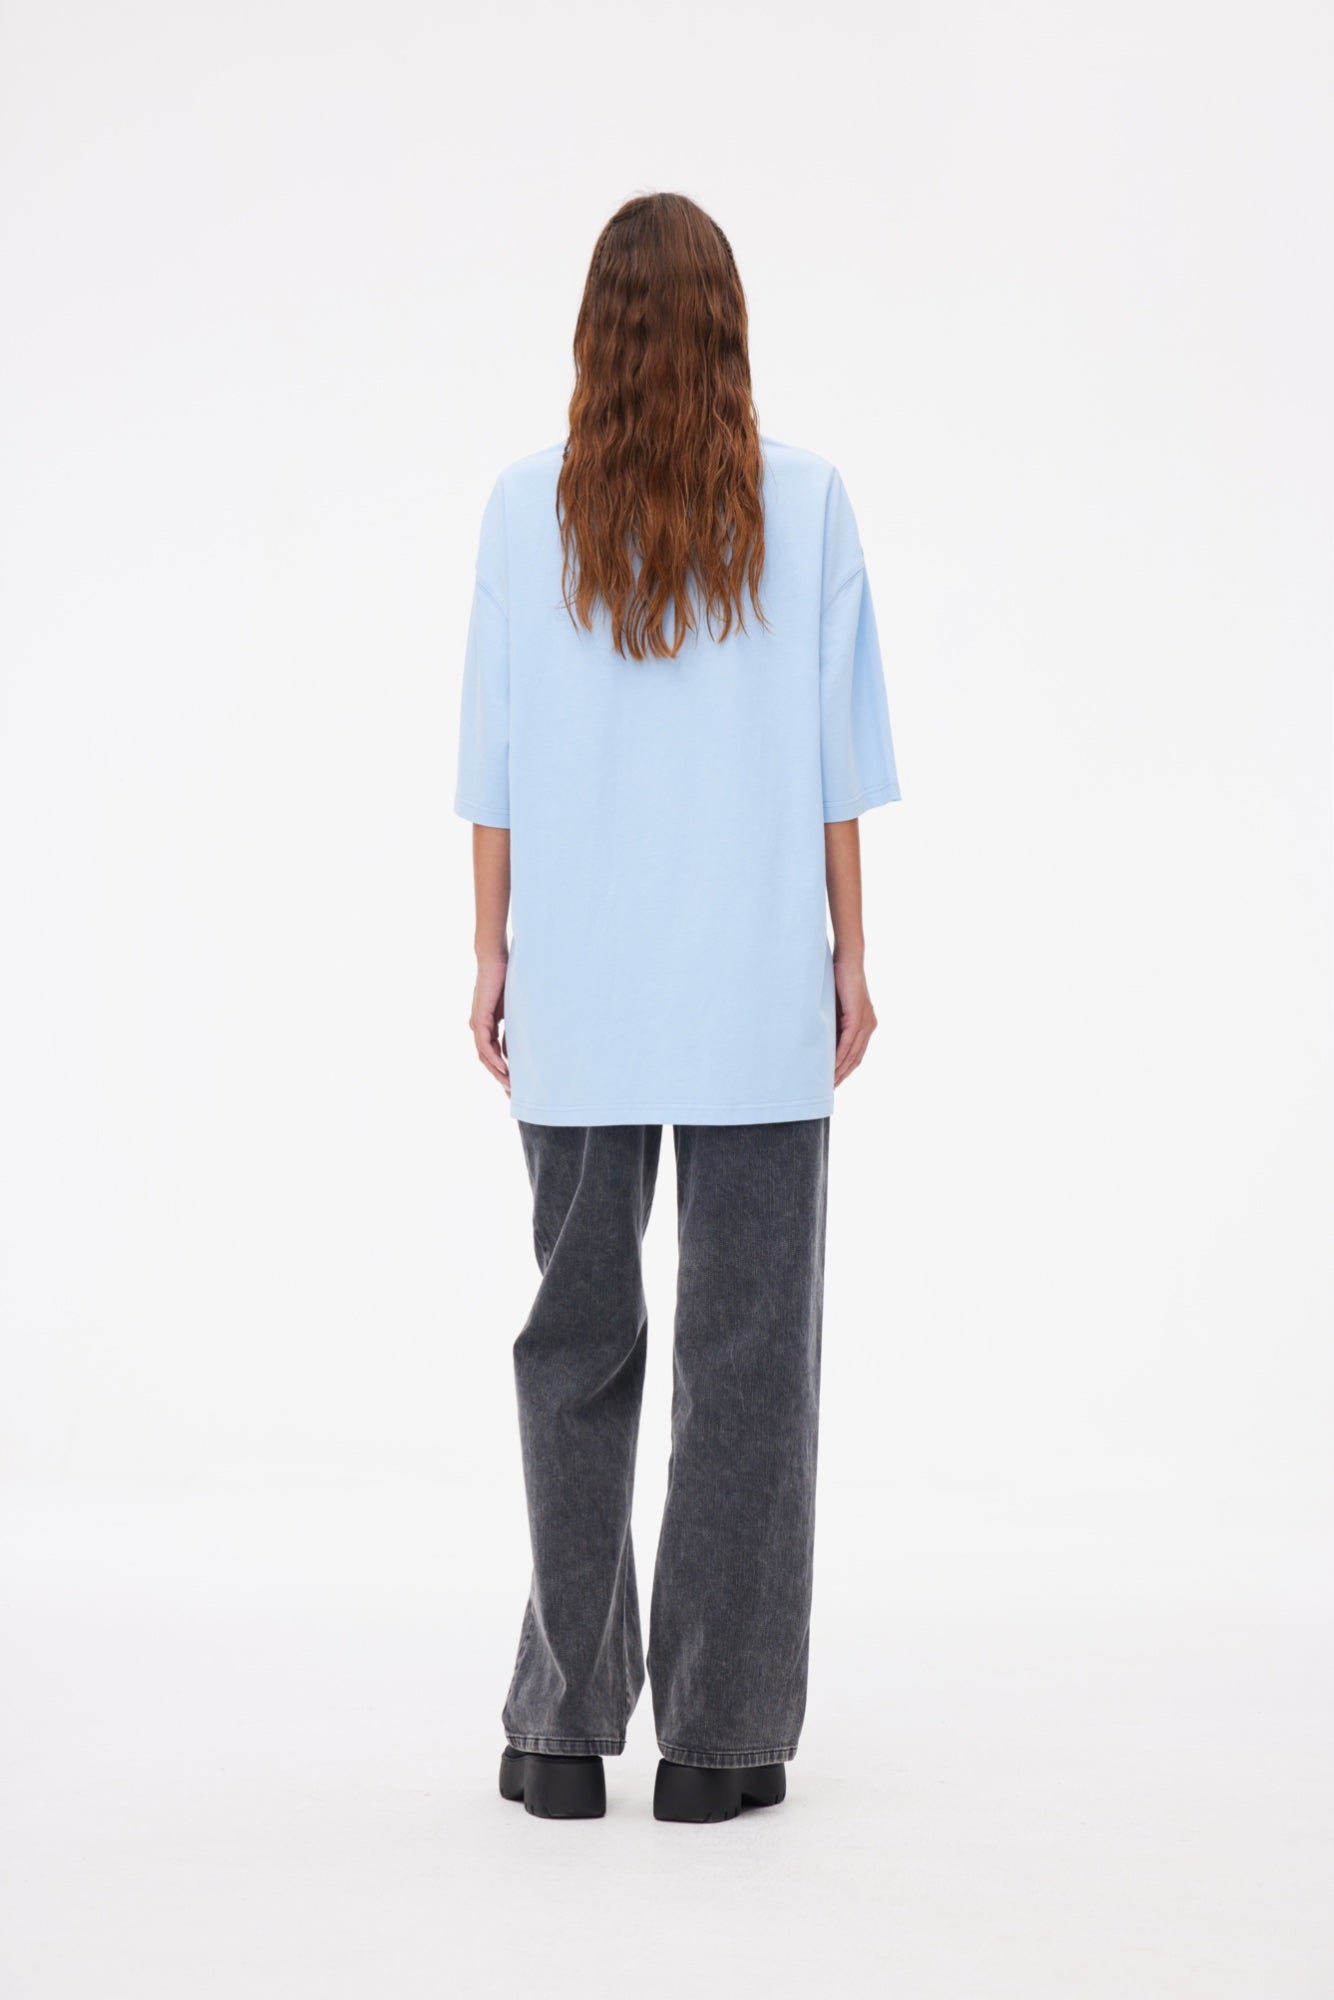 ANN ANDELMAN Jelly Letter T-shirt Blue | MADA IN CHINA